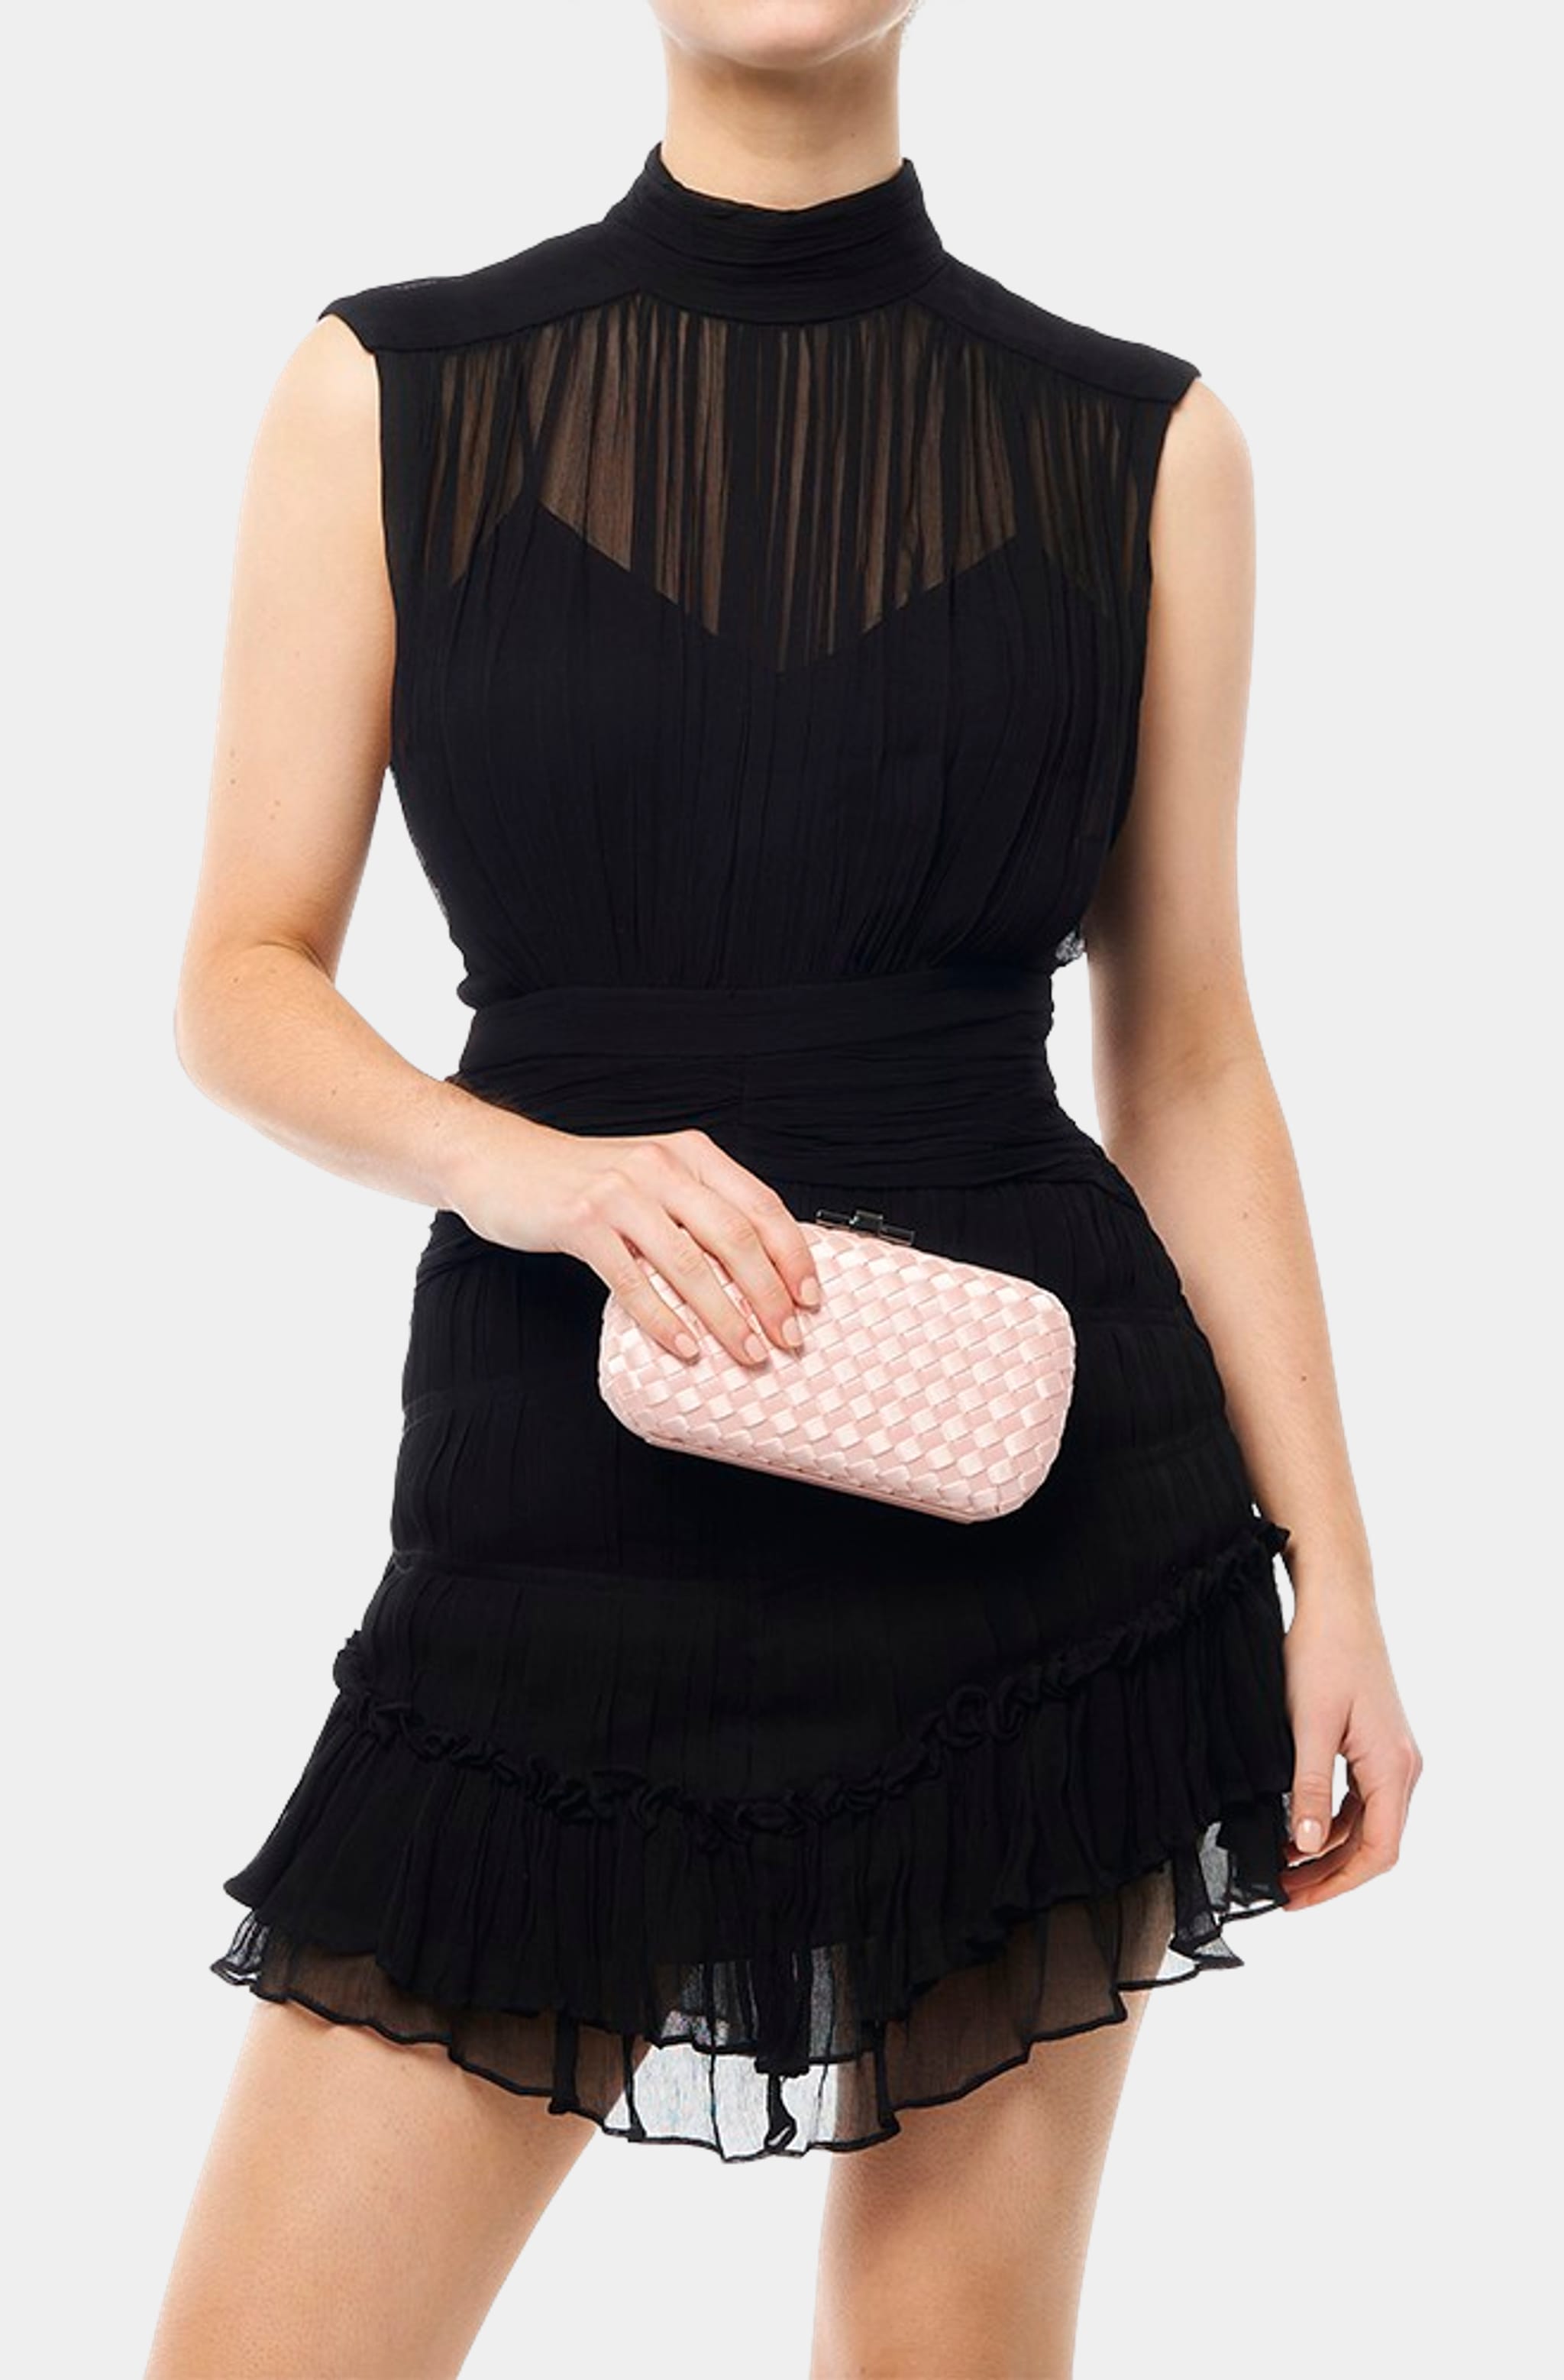 Evelyn Woven Clutch